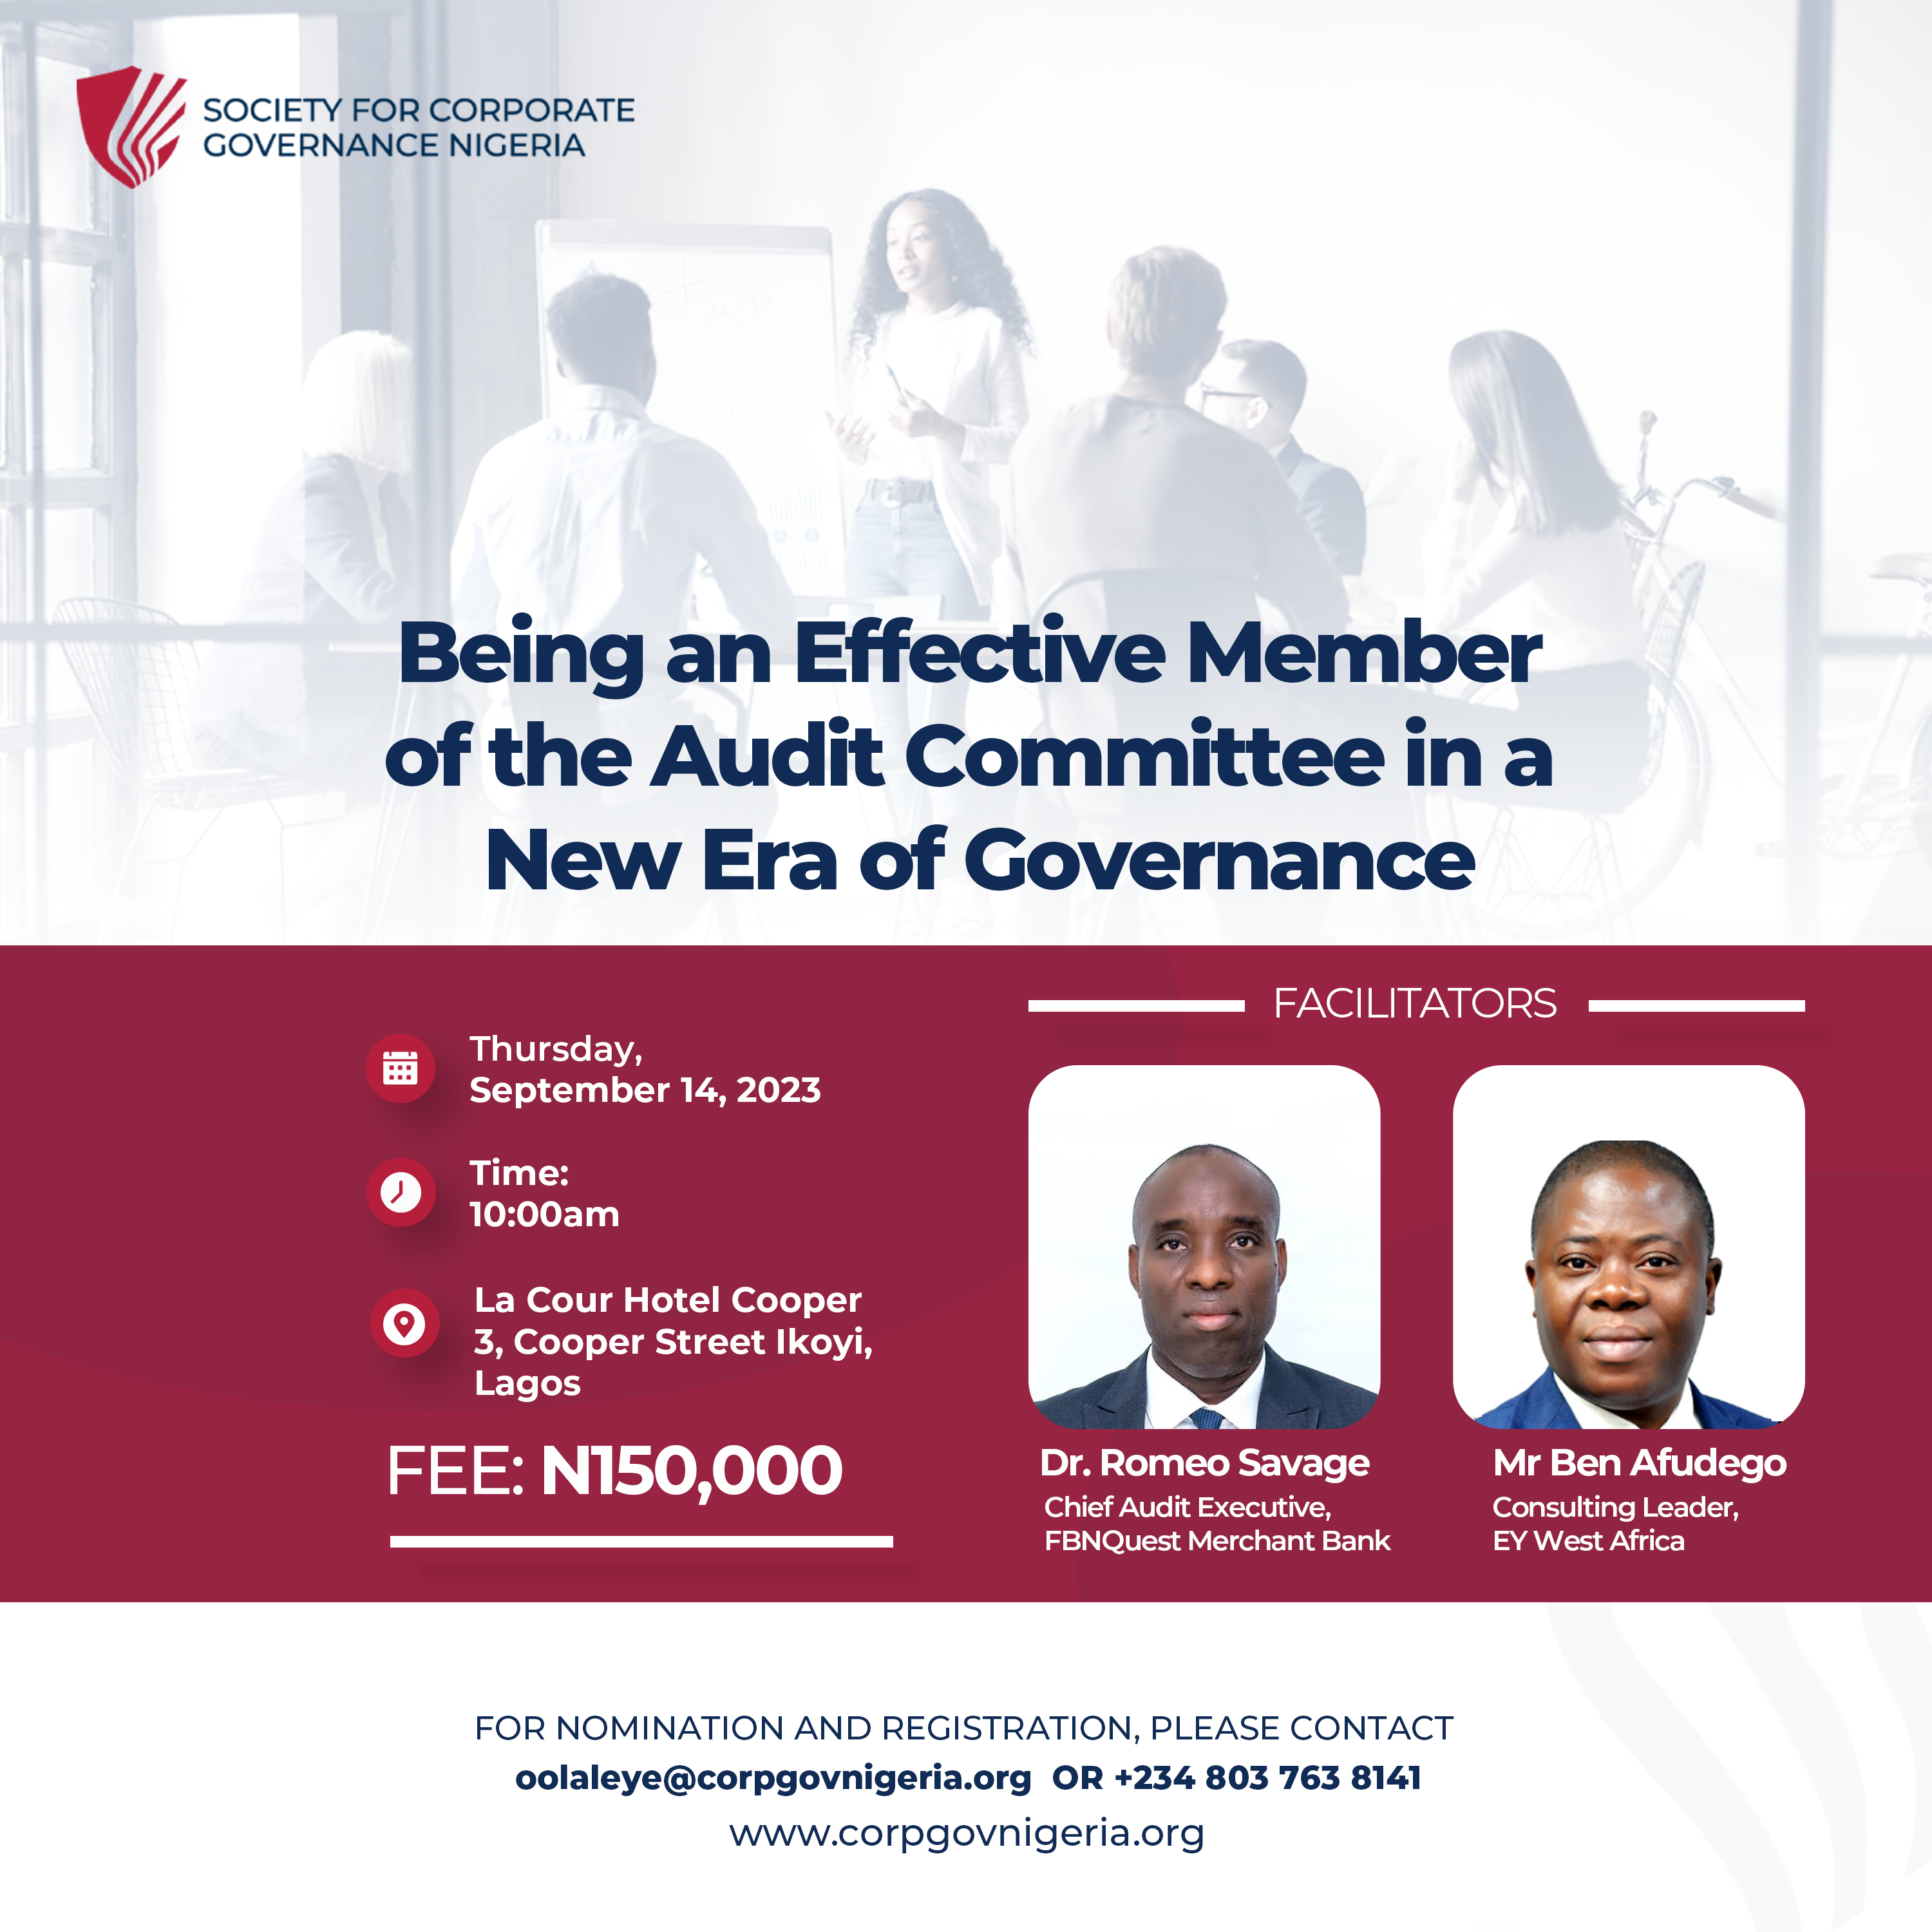 Being an Effective Member of the Audit Committee in a New Era of Governance.